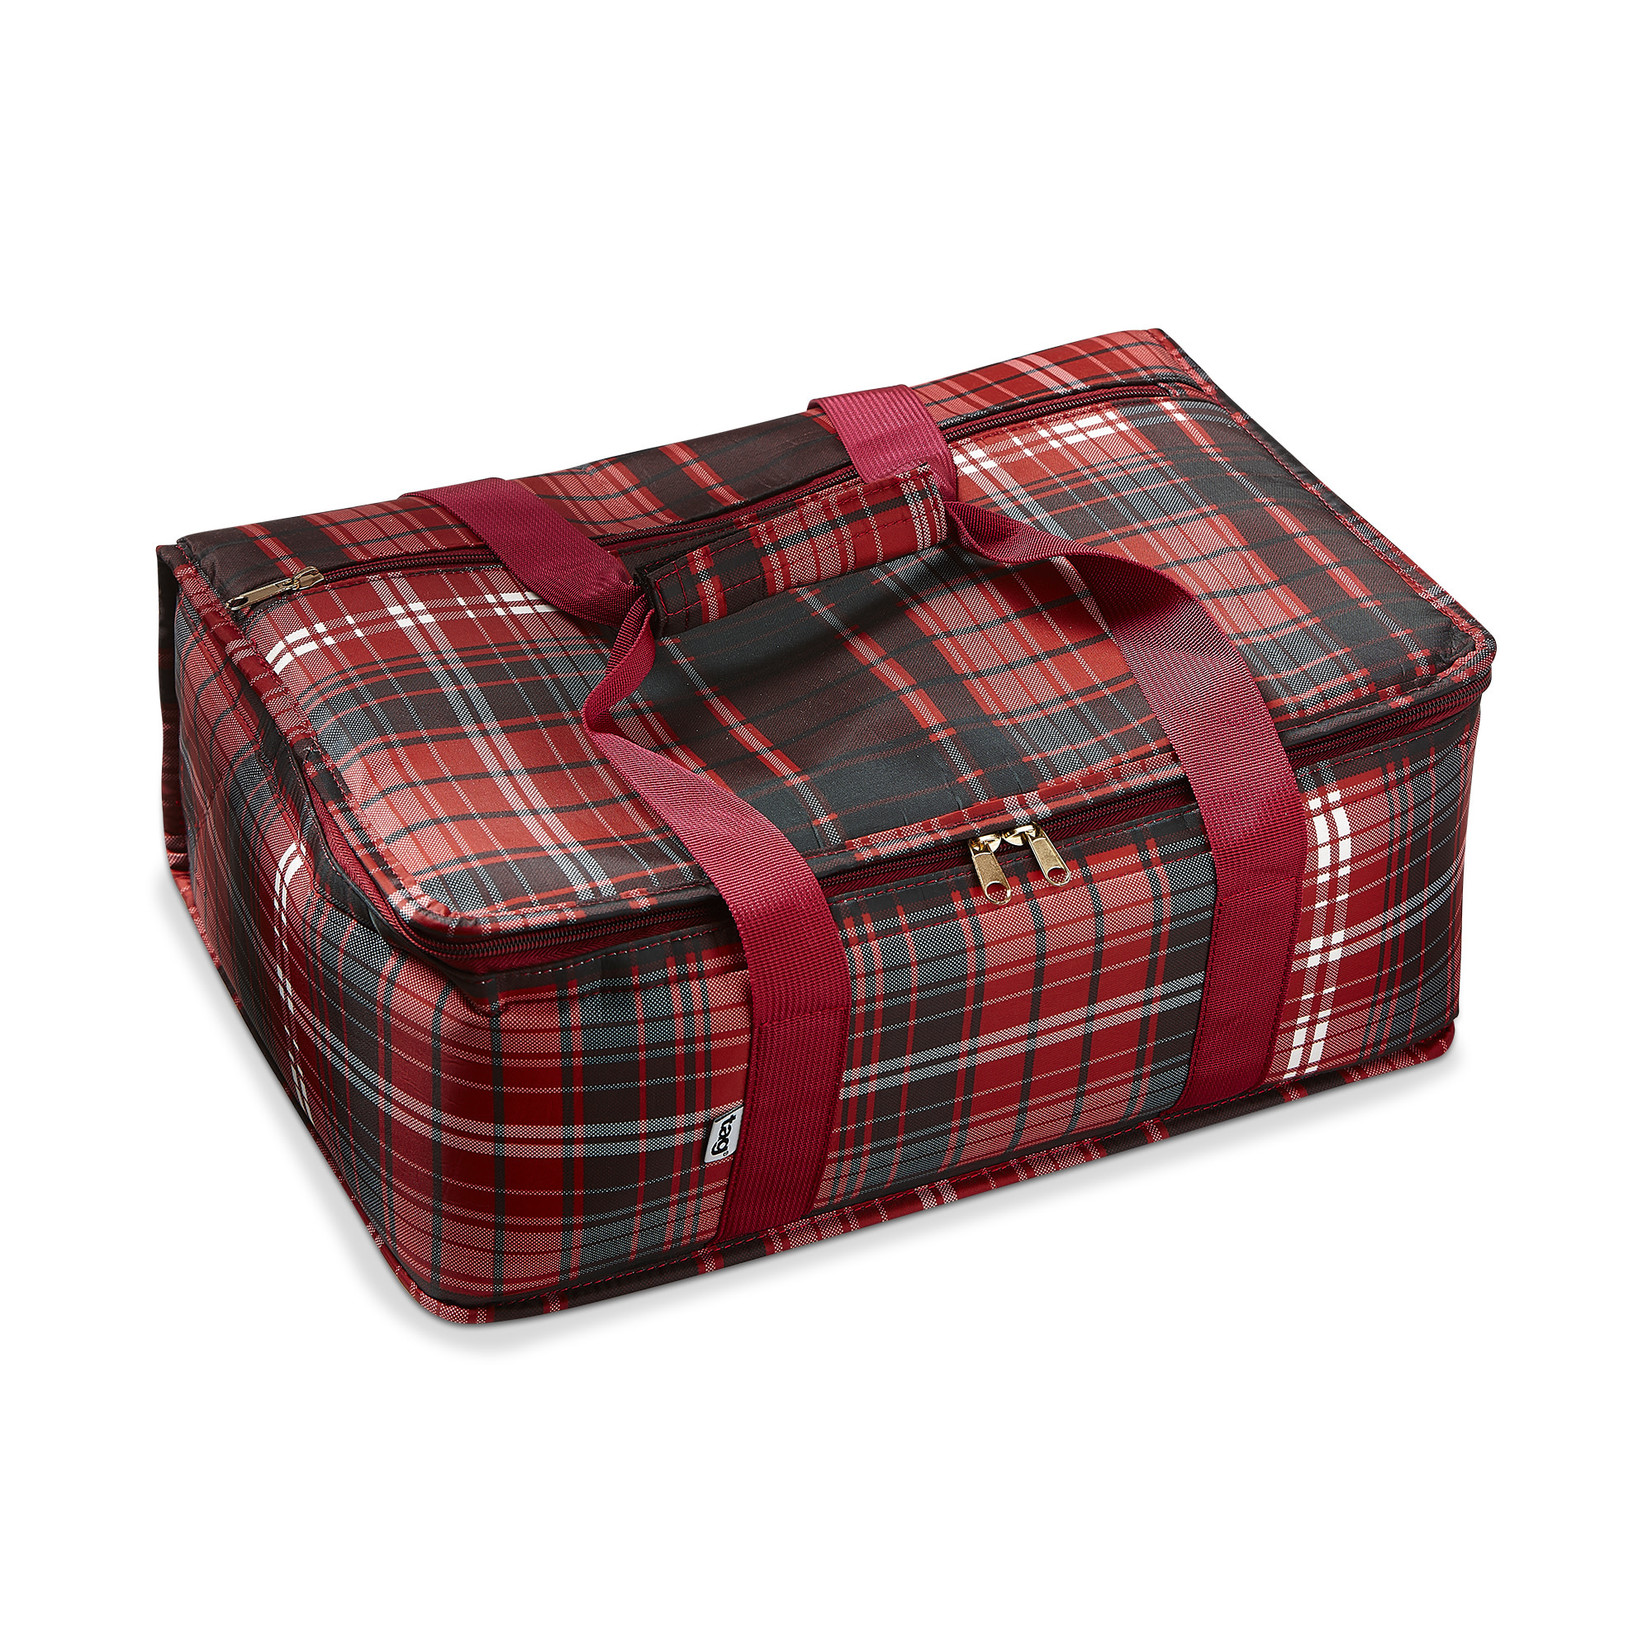 tag Plaid Insulated Casserole Carrier